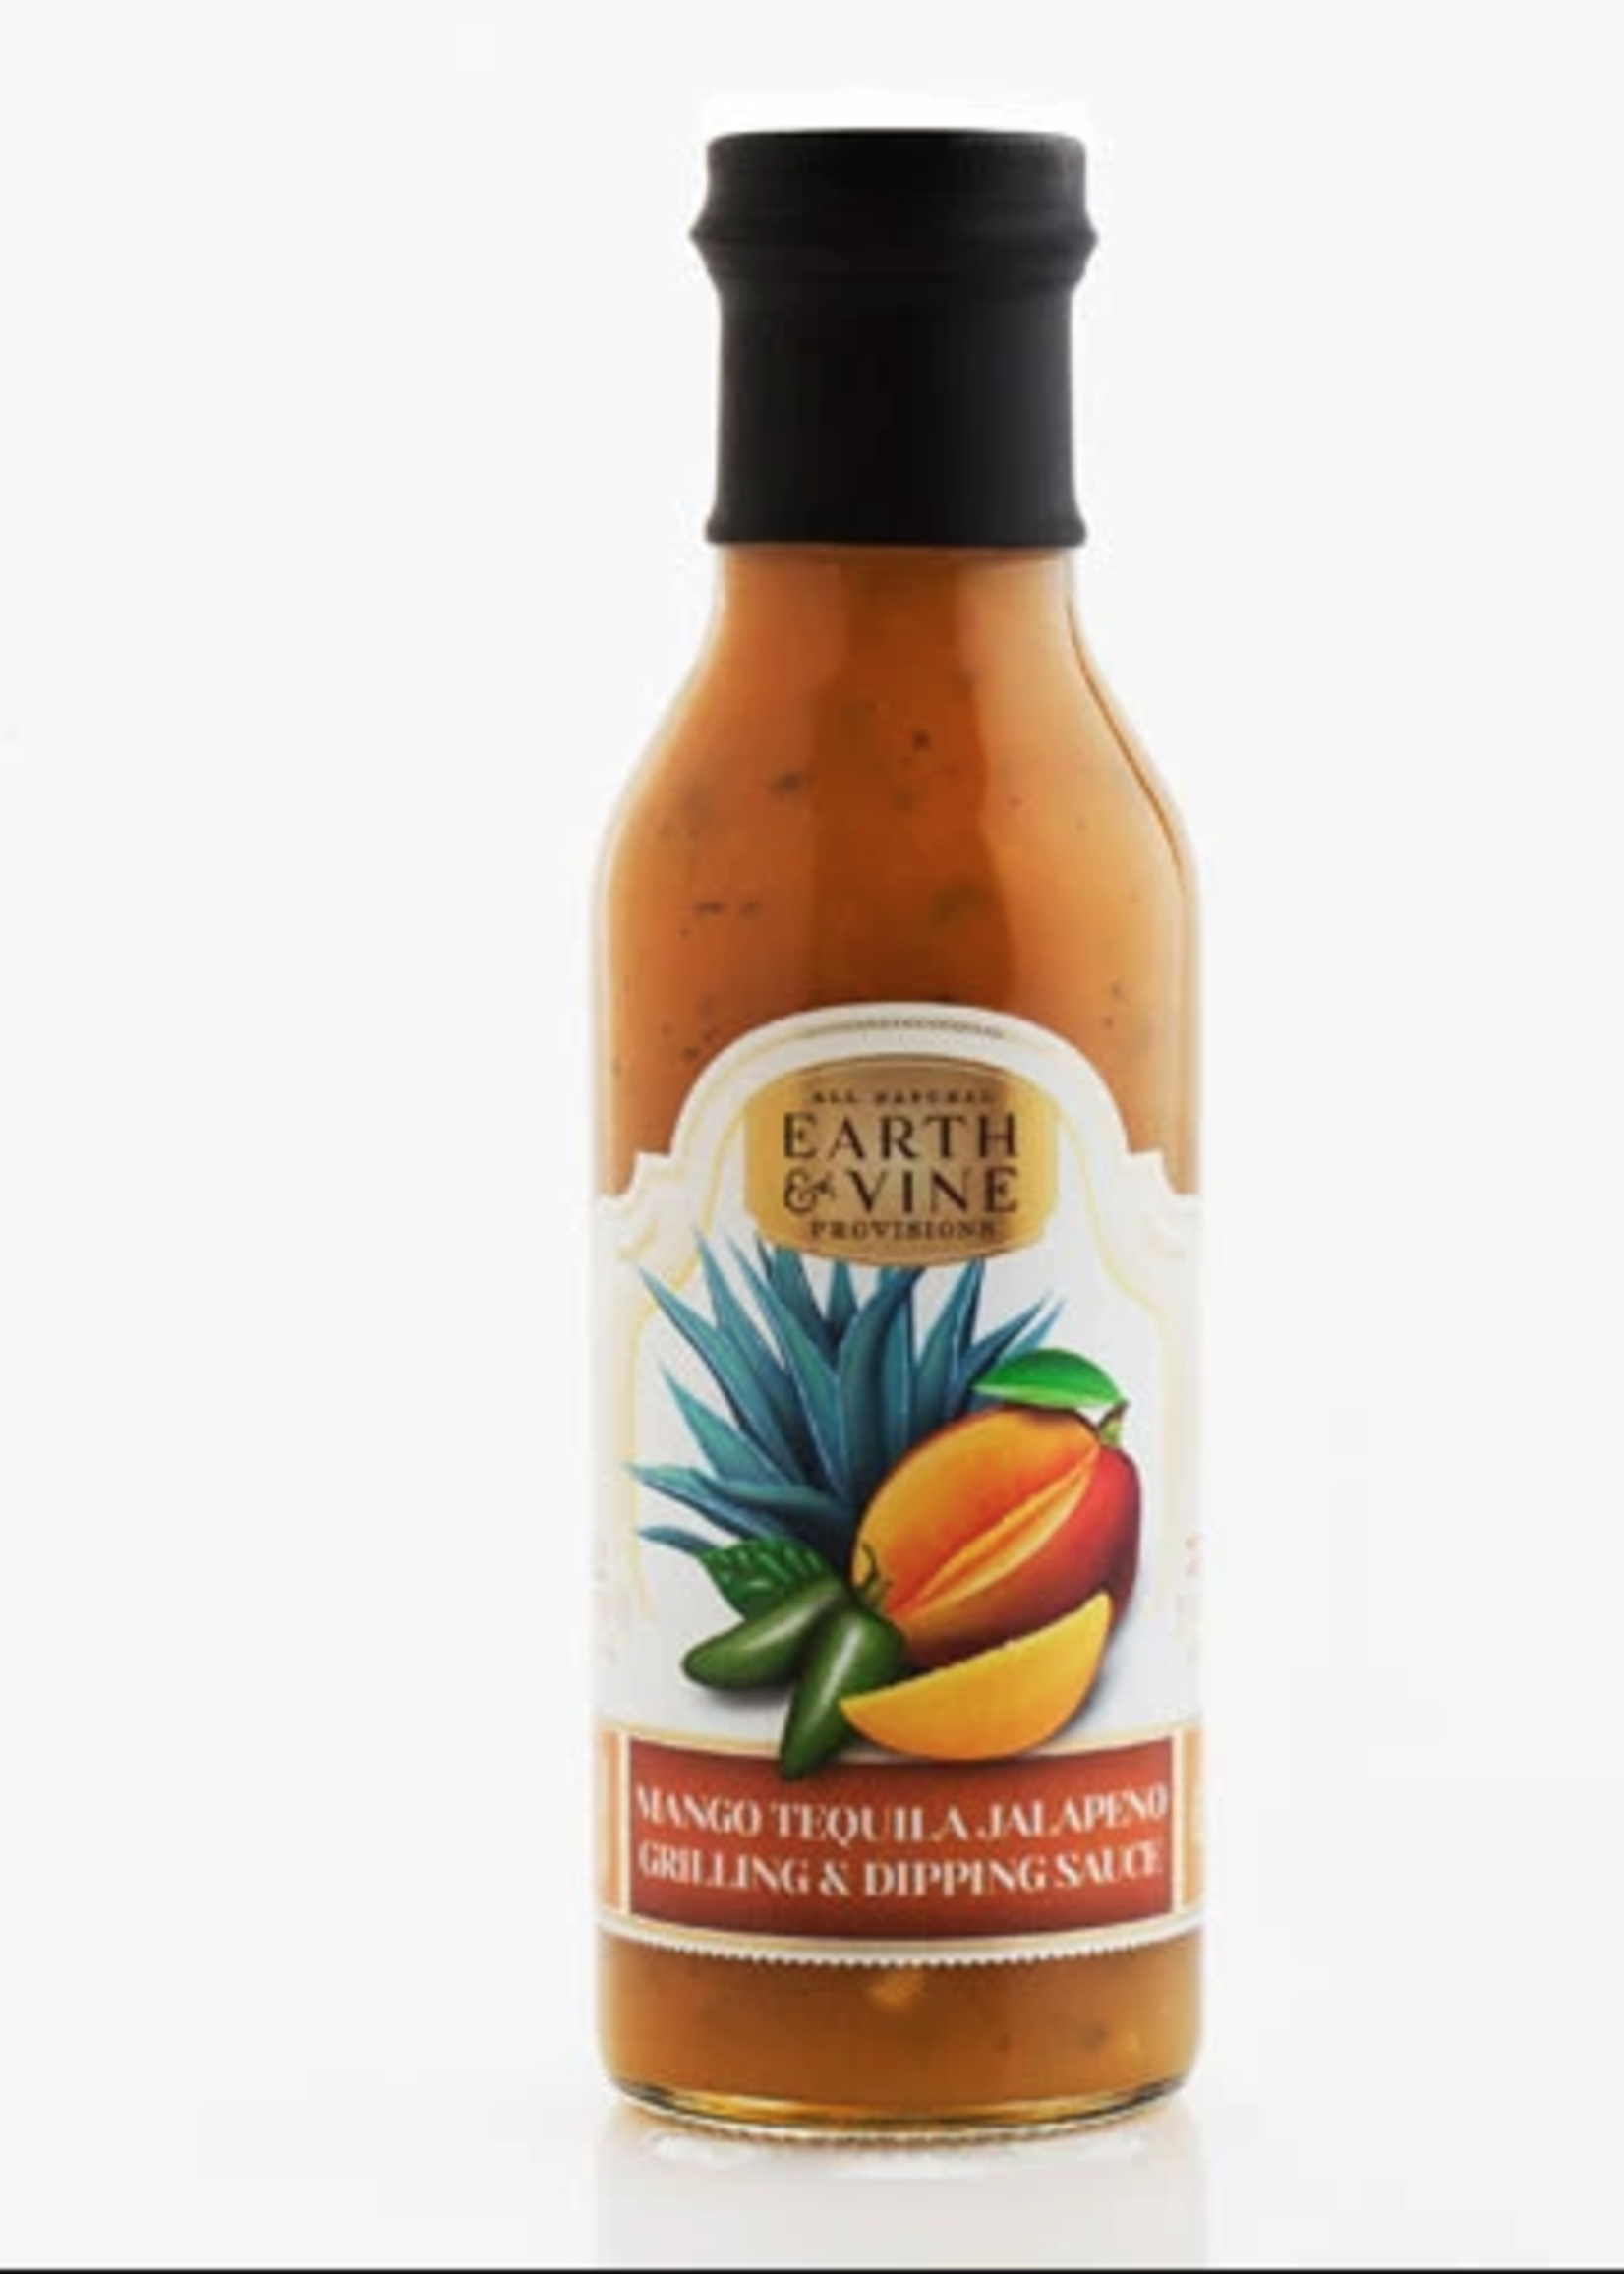 Earth & Vine Provisions, Inc. 12oz MANGO TEQUILA JALAPENO GRILLING & DIPPING SAUCE